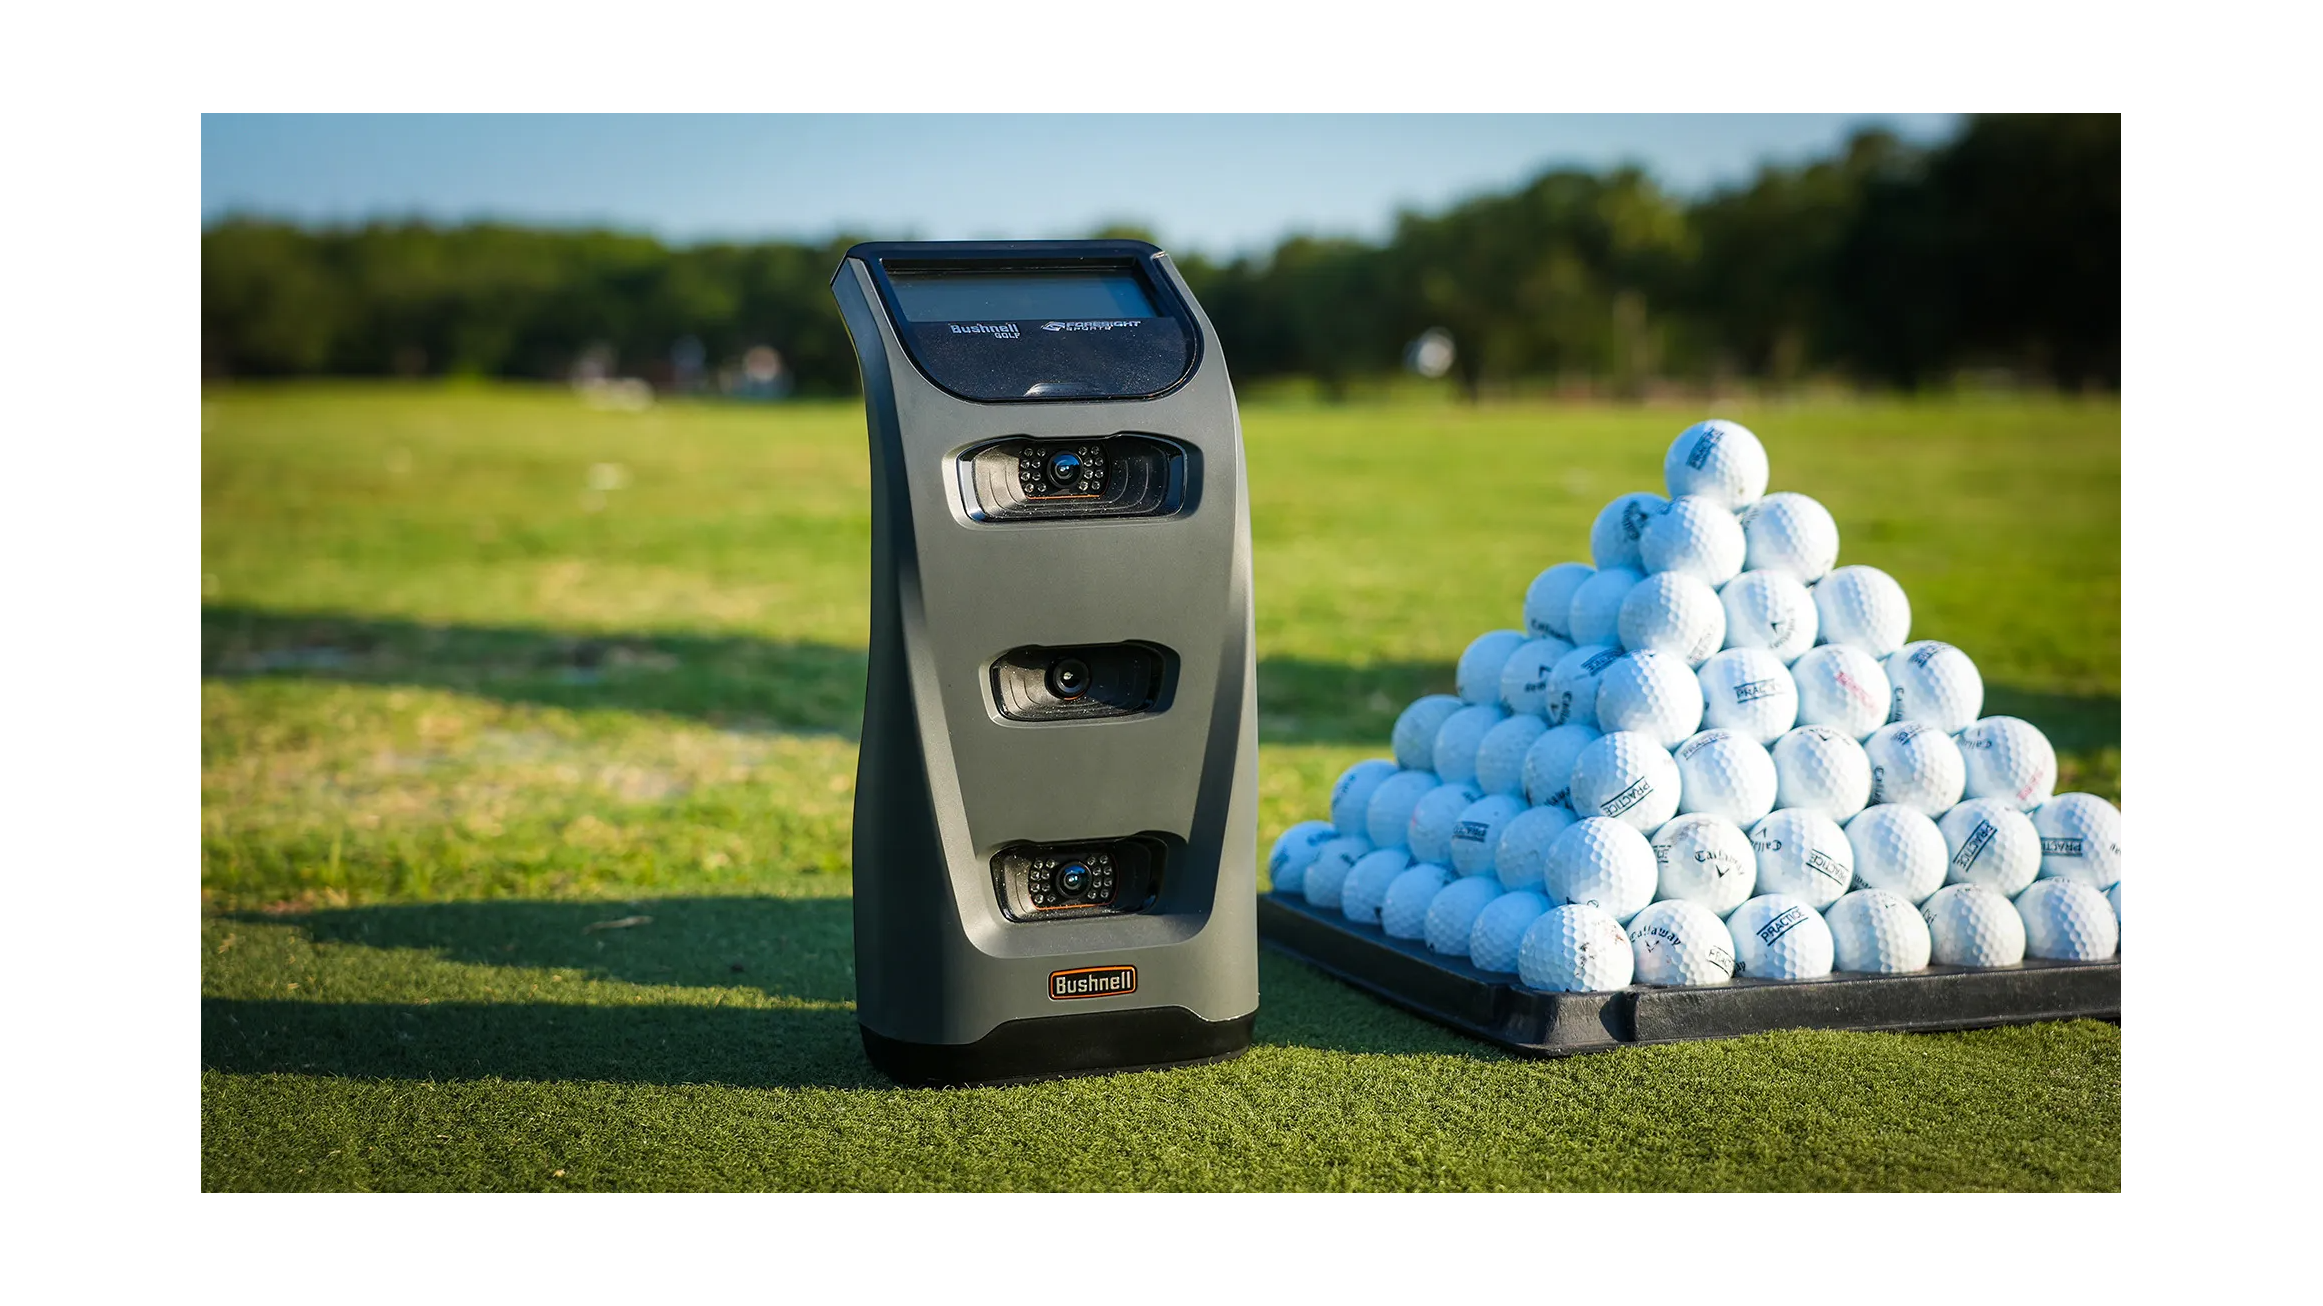 Bushnell Launch Pro next to a stack of golf balls  at the range